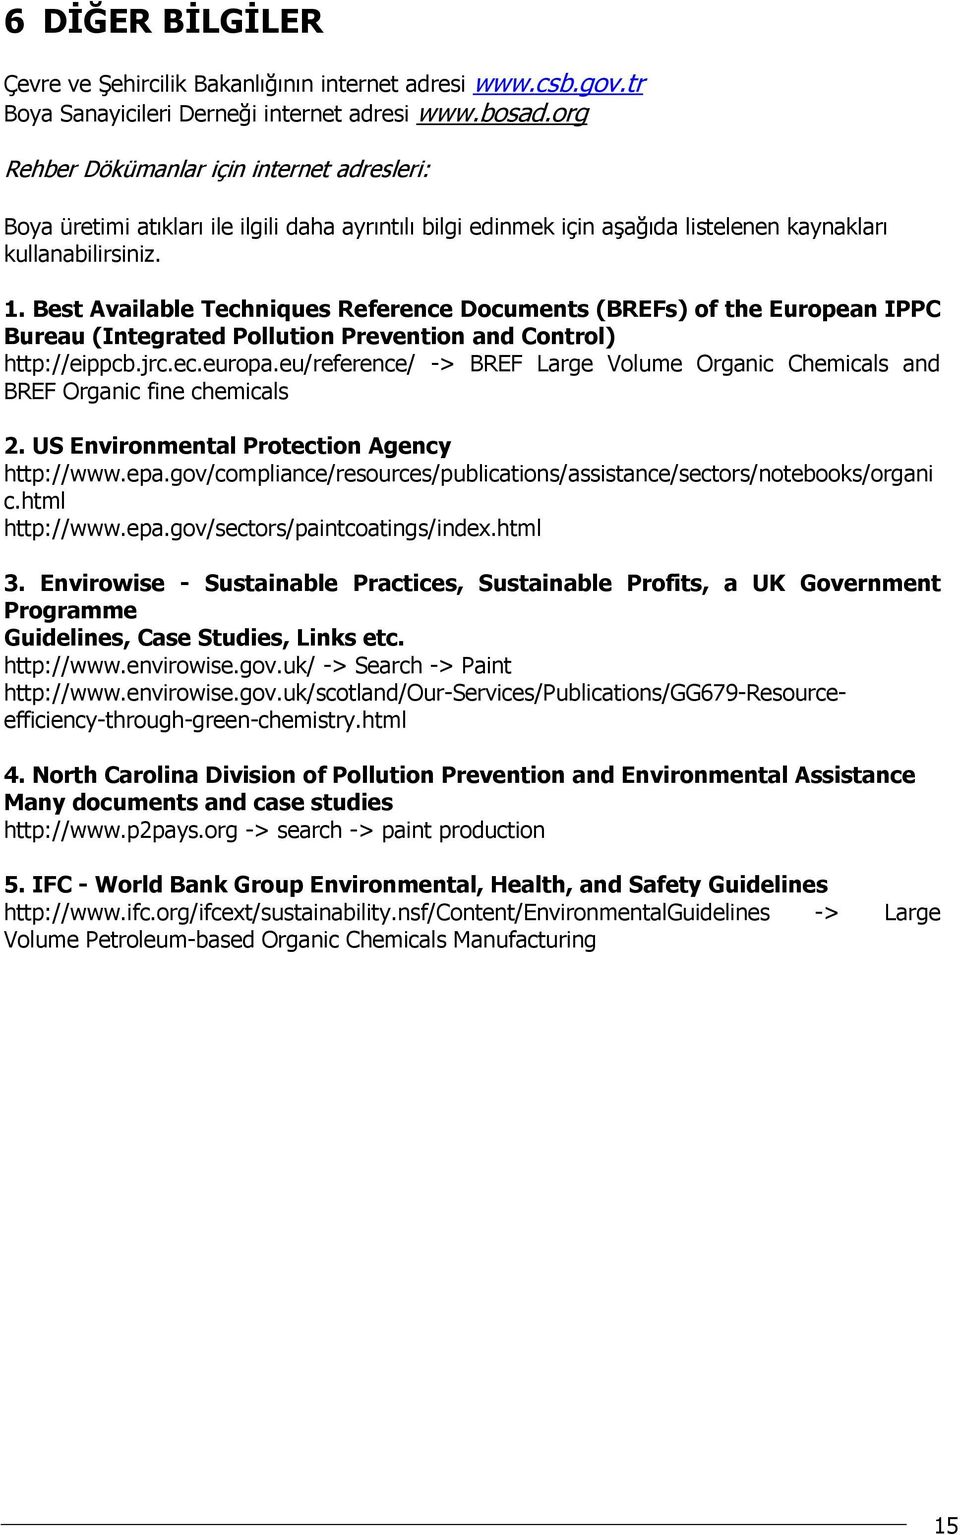 Best Available Techniques Reference Documents (BREFs) of the European IPPC Bureau (Integrated Pollution Prevention and Control) http://eippcb.jrc.ec.europa.